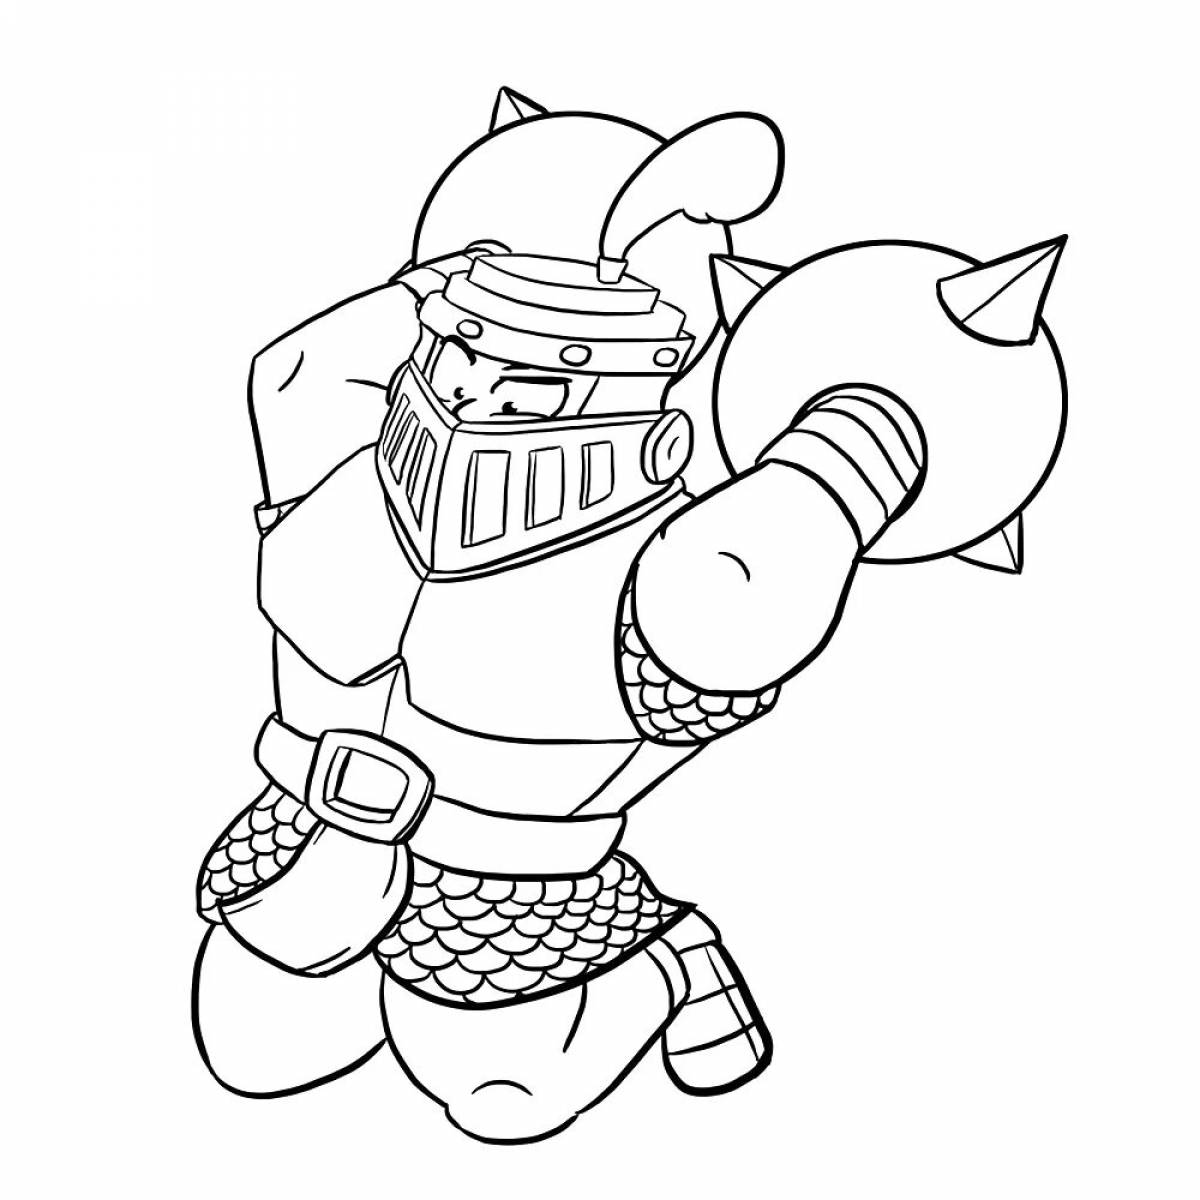 Clash royale arena coloring page update